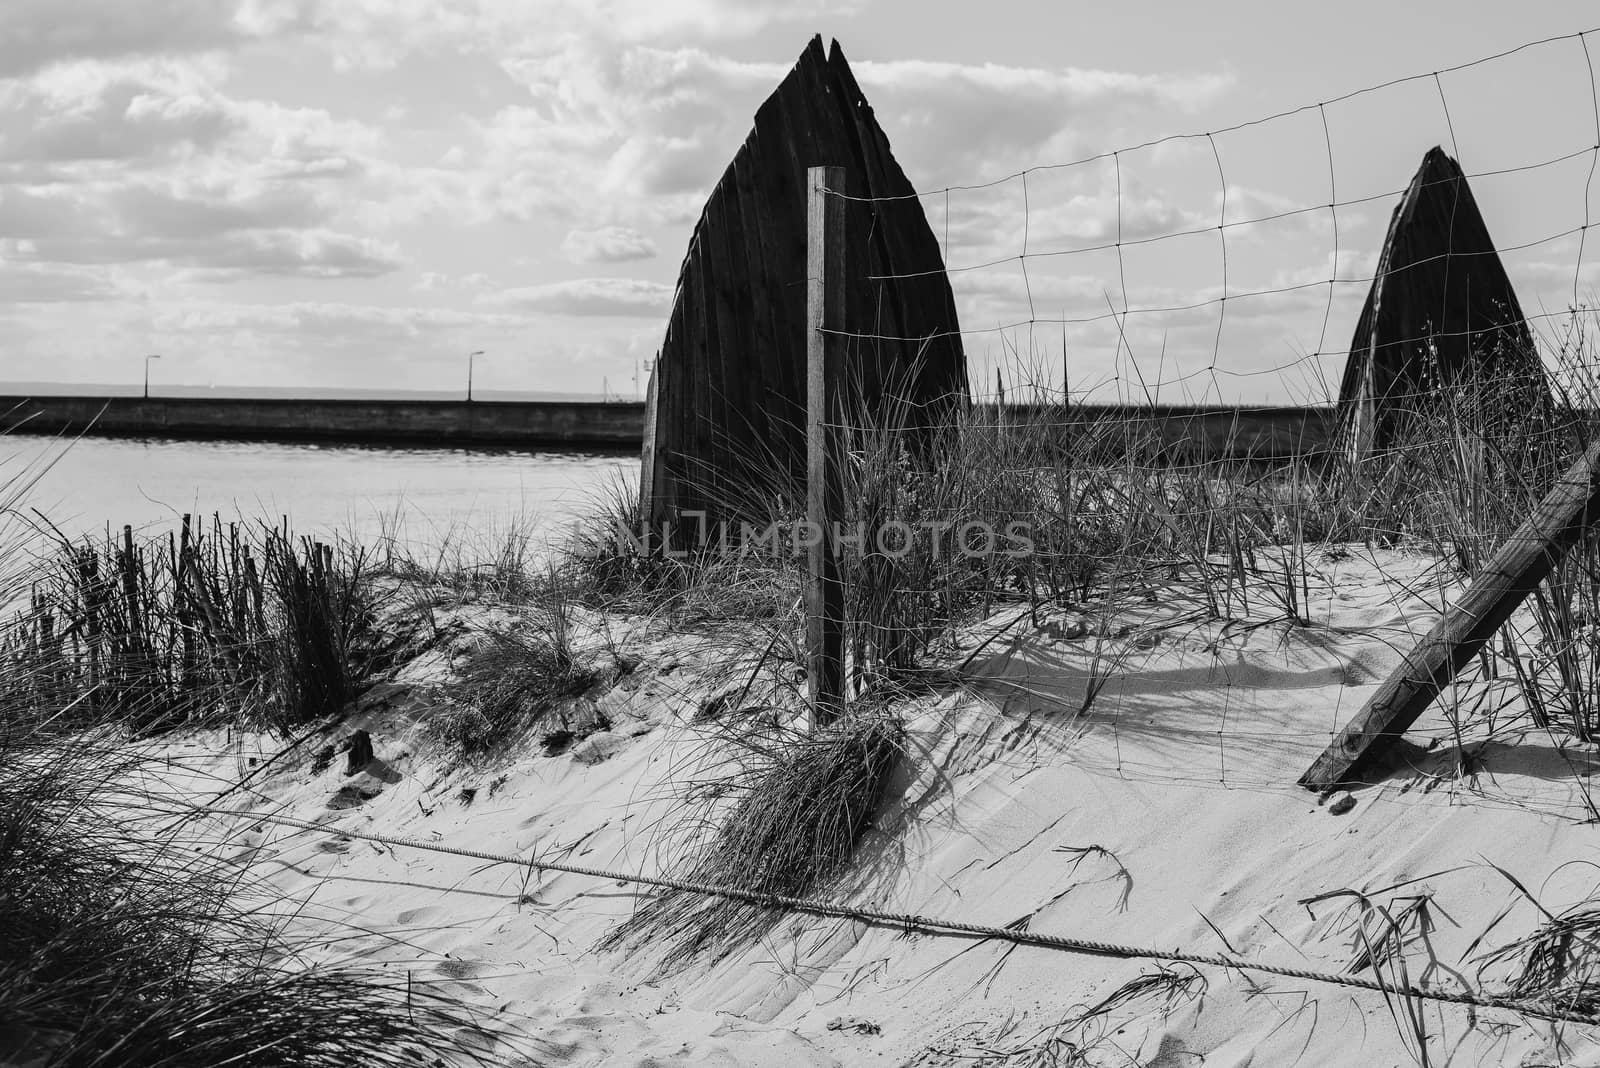 A wooden sculpture with the fence at sandy beach concept in B&W